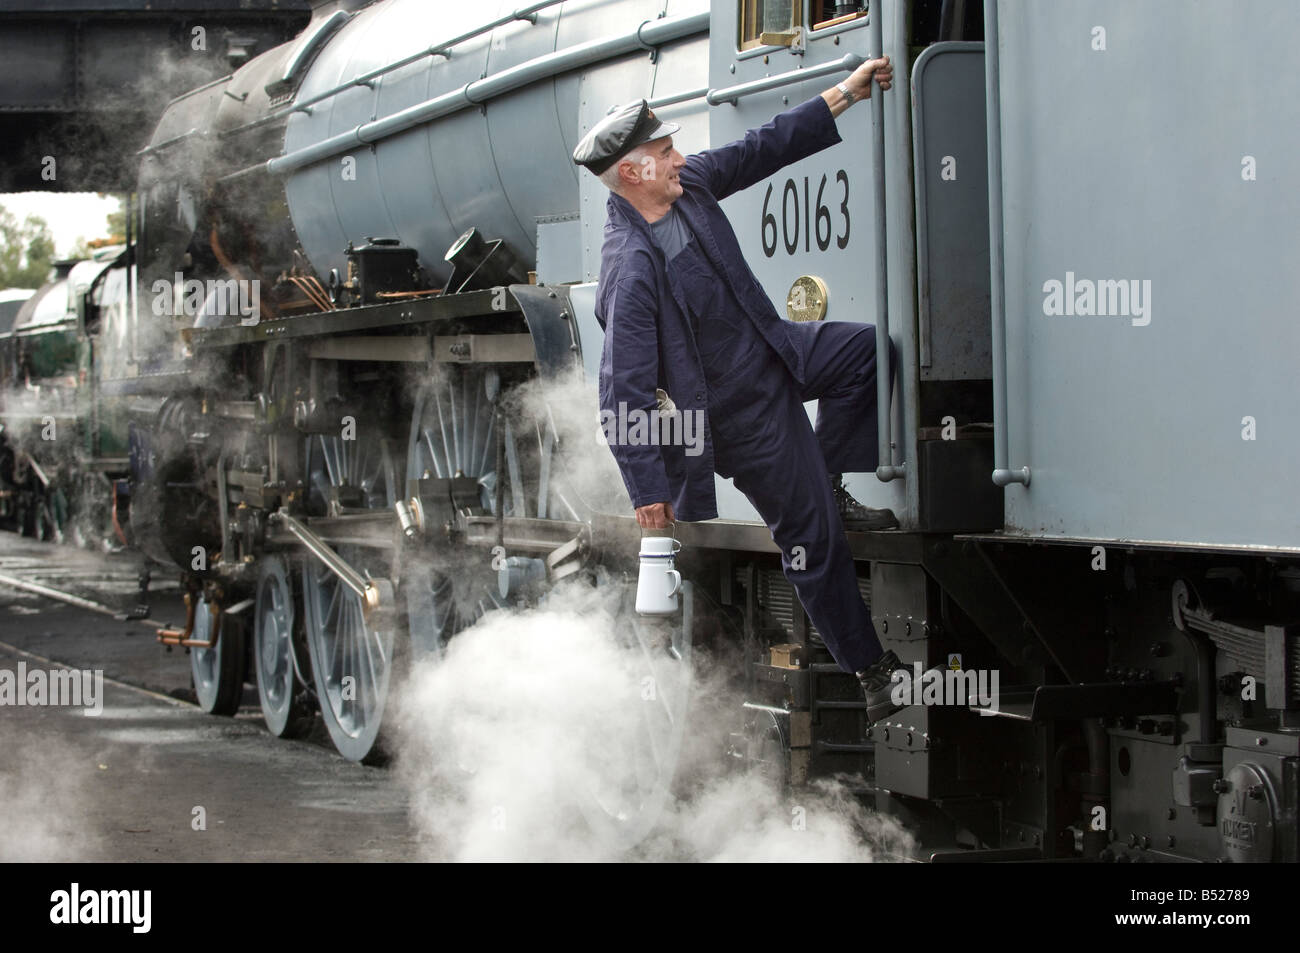 A steam engine driver climbs into his cab. The train is 60163 Tornado, on the Great Central Railway. Stock Photo